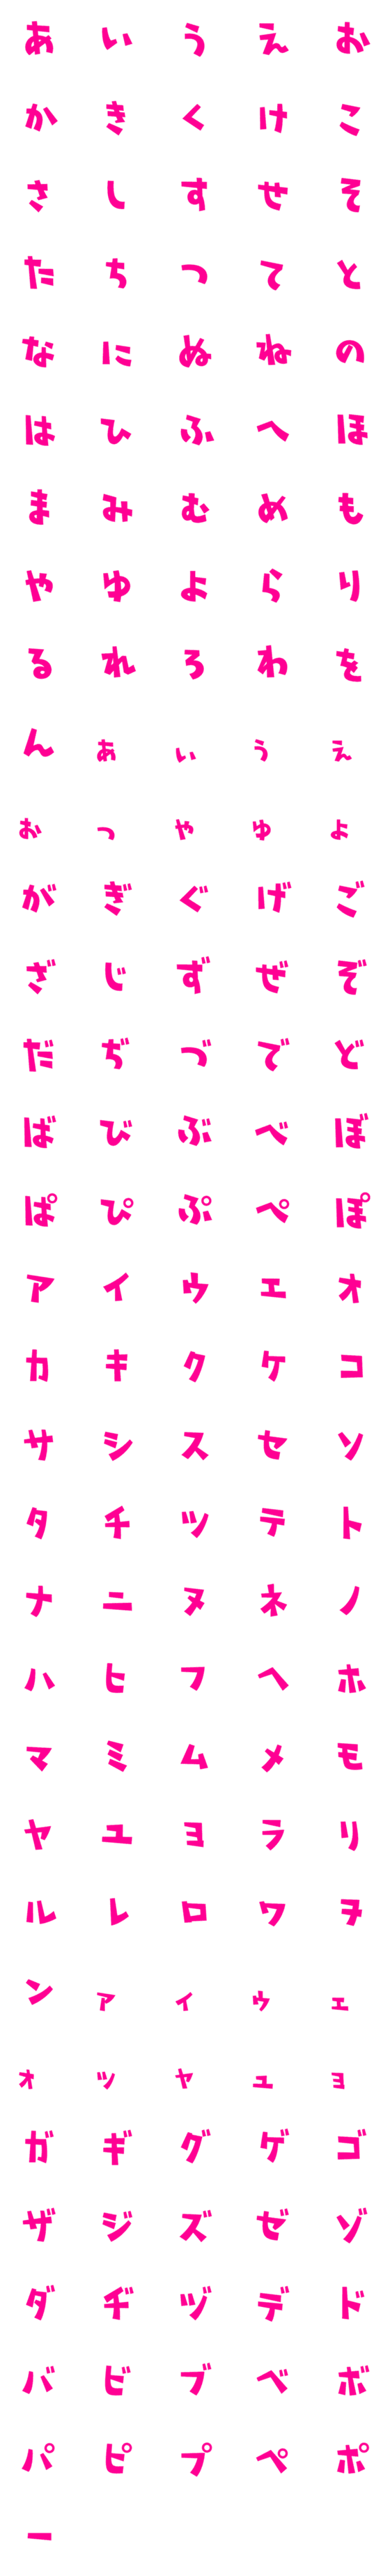 [LINE絵文字]アニメ字の画像一覧